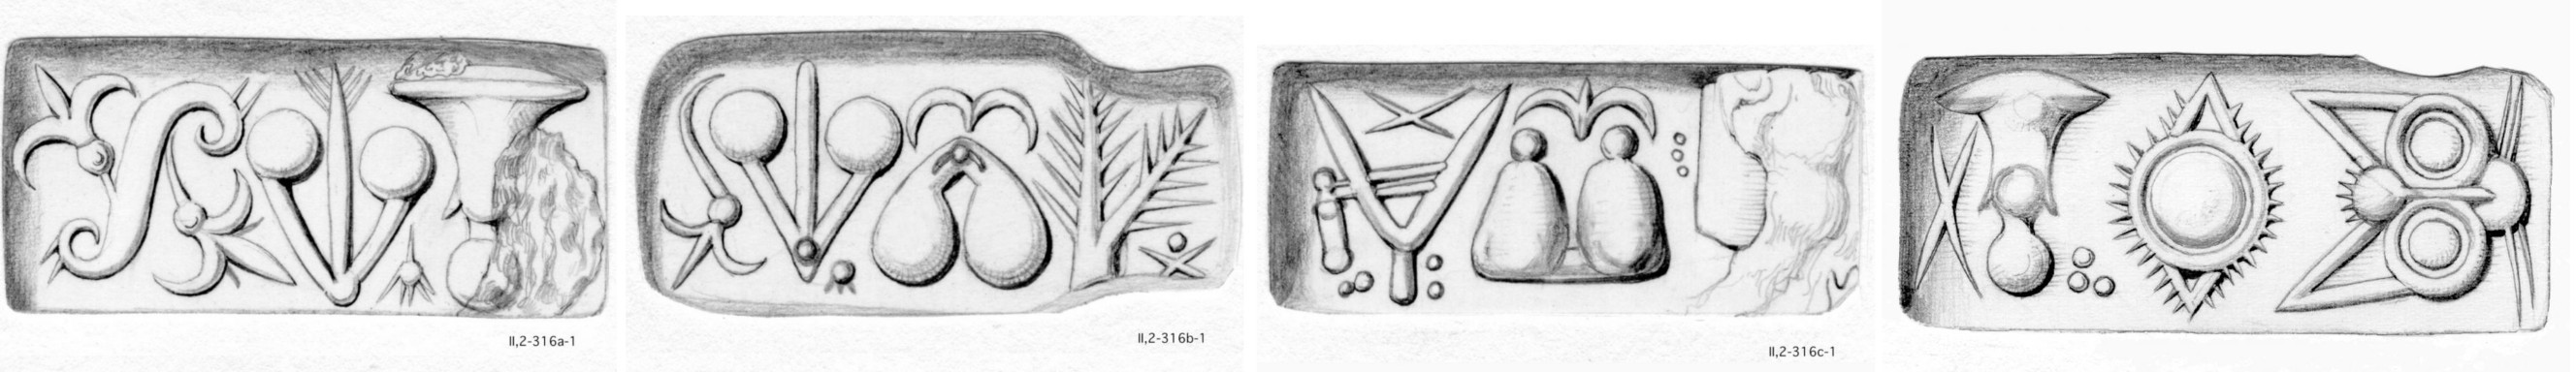 Fig. 5: The four sides of CMS
                           II,2 316 with Cretan hieroglyphs: CHIC 044, 049 | CHIC X, 029, 077, 049 |
                           CHIC X, 057, 034, 056? | CHIC X, 044, 005. [Graphic by courtesy of the CMS Heidelberg.]